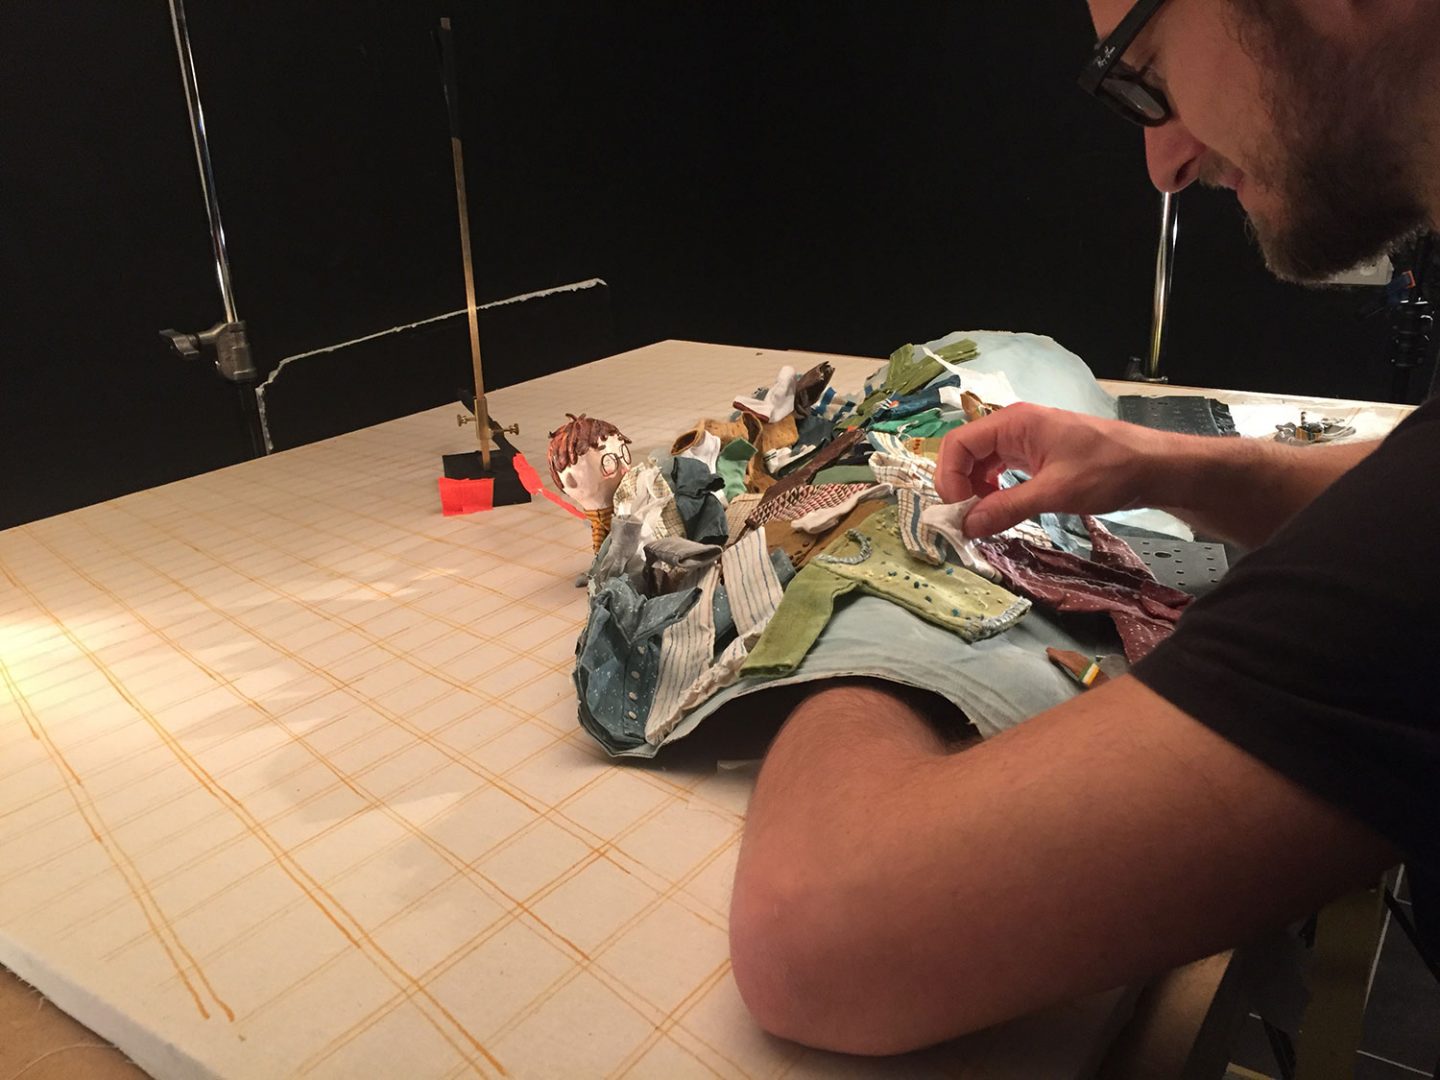 Sylvain Derosne (lead animator) animating the waves of clothes. All images in this piece: © Ikki Films.